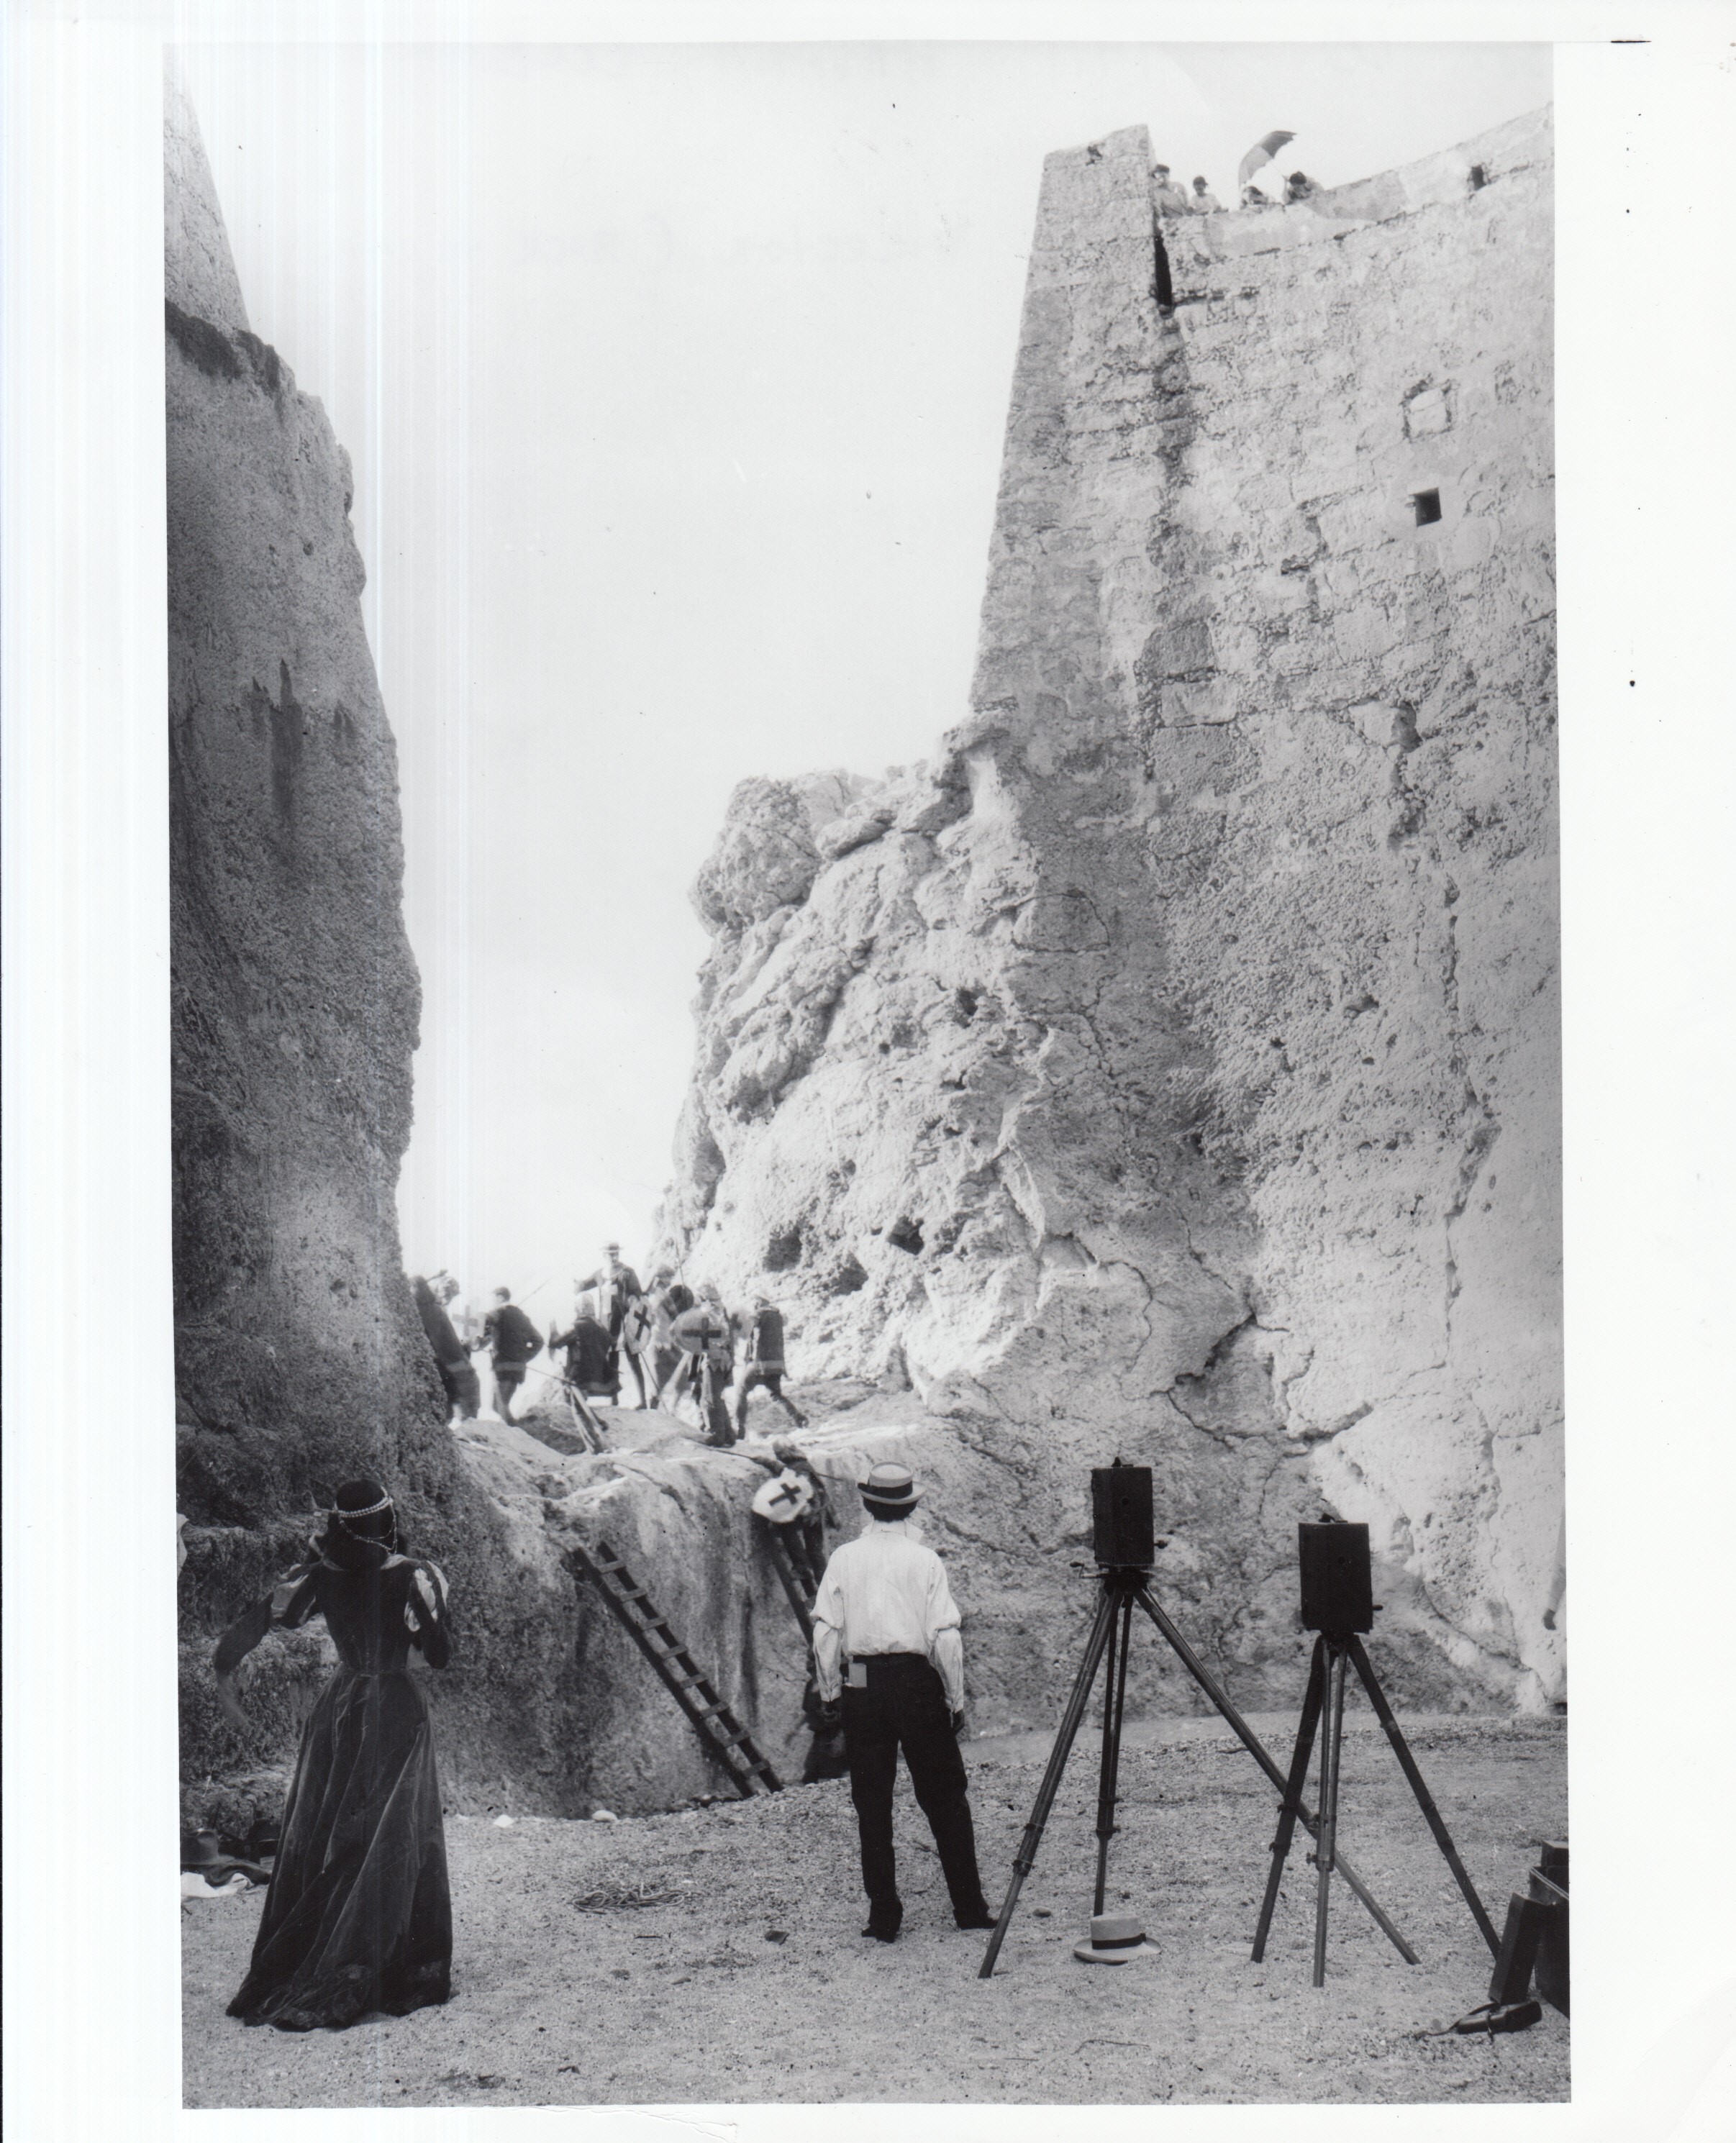 J. Searle Dawley directing a scene from "Christian and Moor" at Havana's Morro Castle, Henry Cronjager is the cameraman.